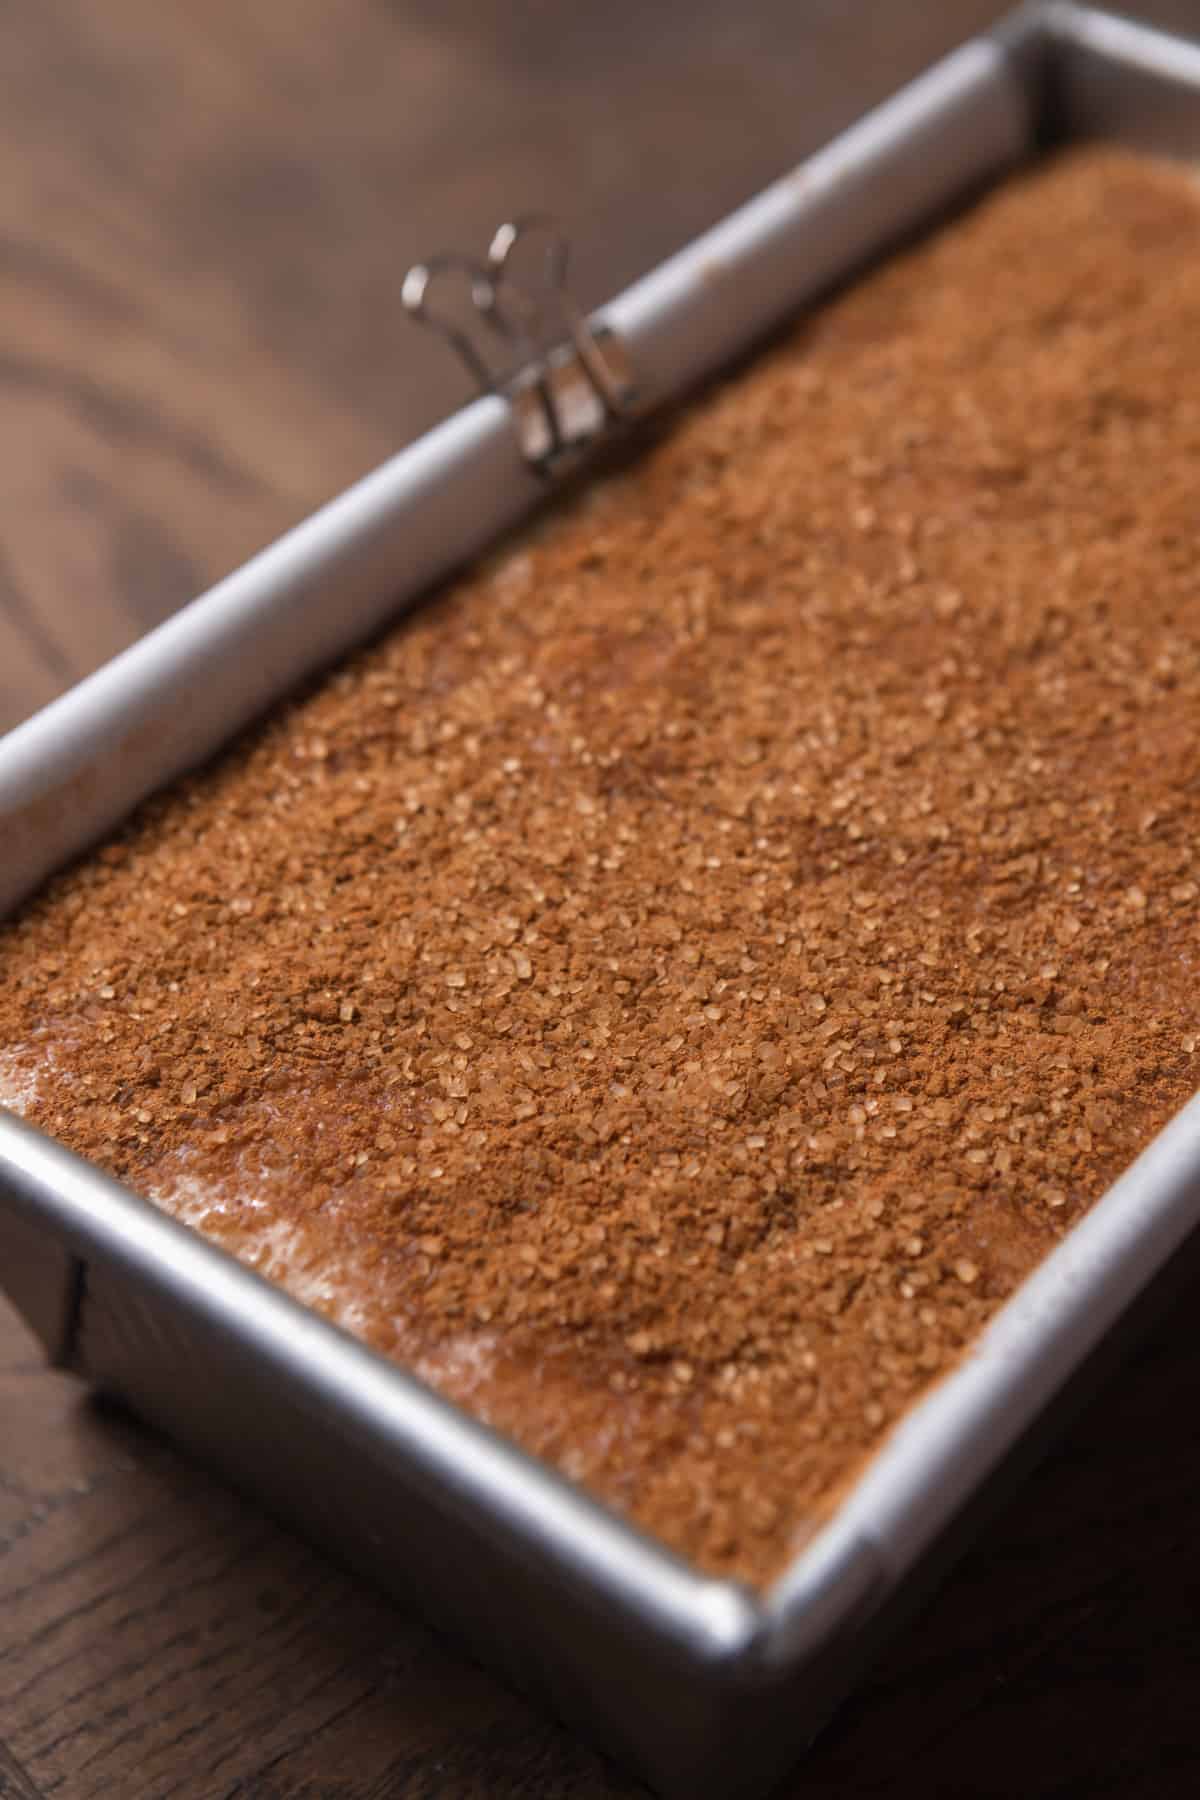 Banana bread batter in a bread pan with a sugar topping.